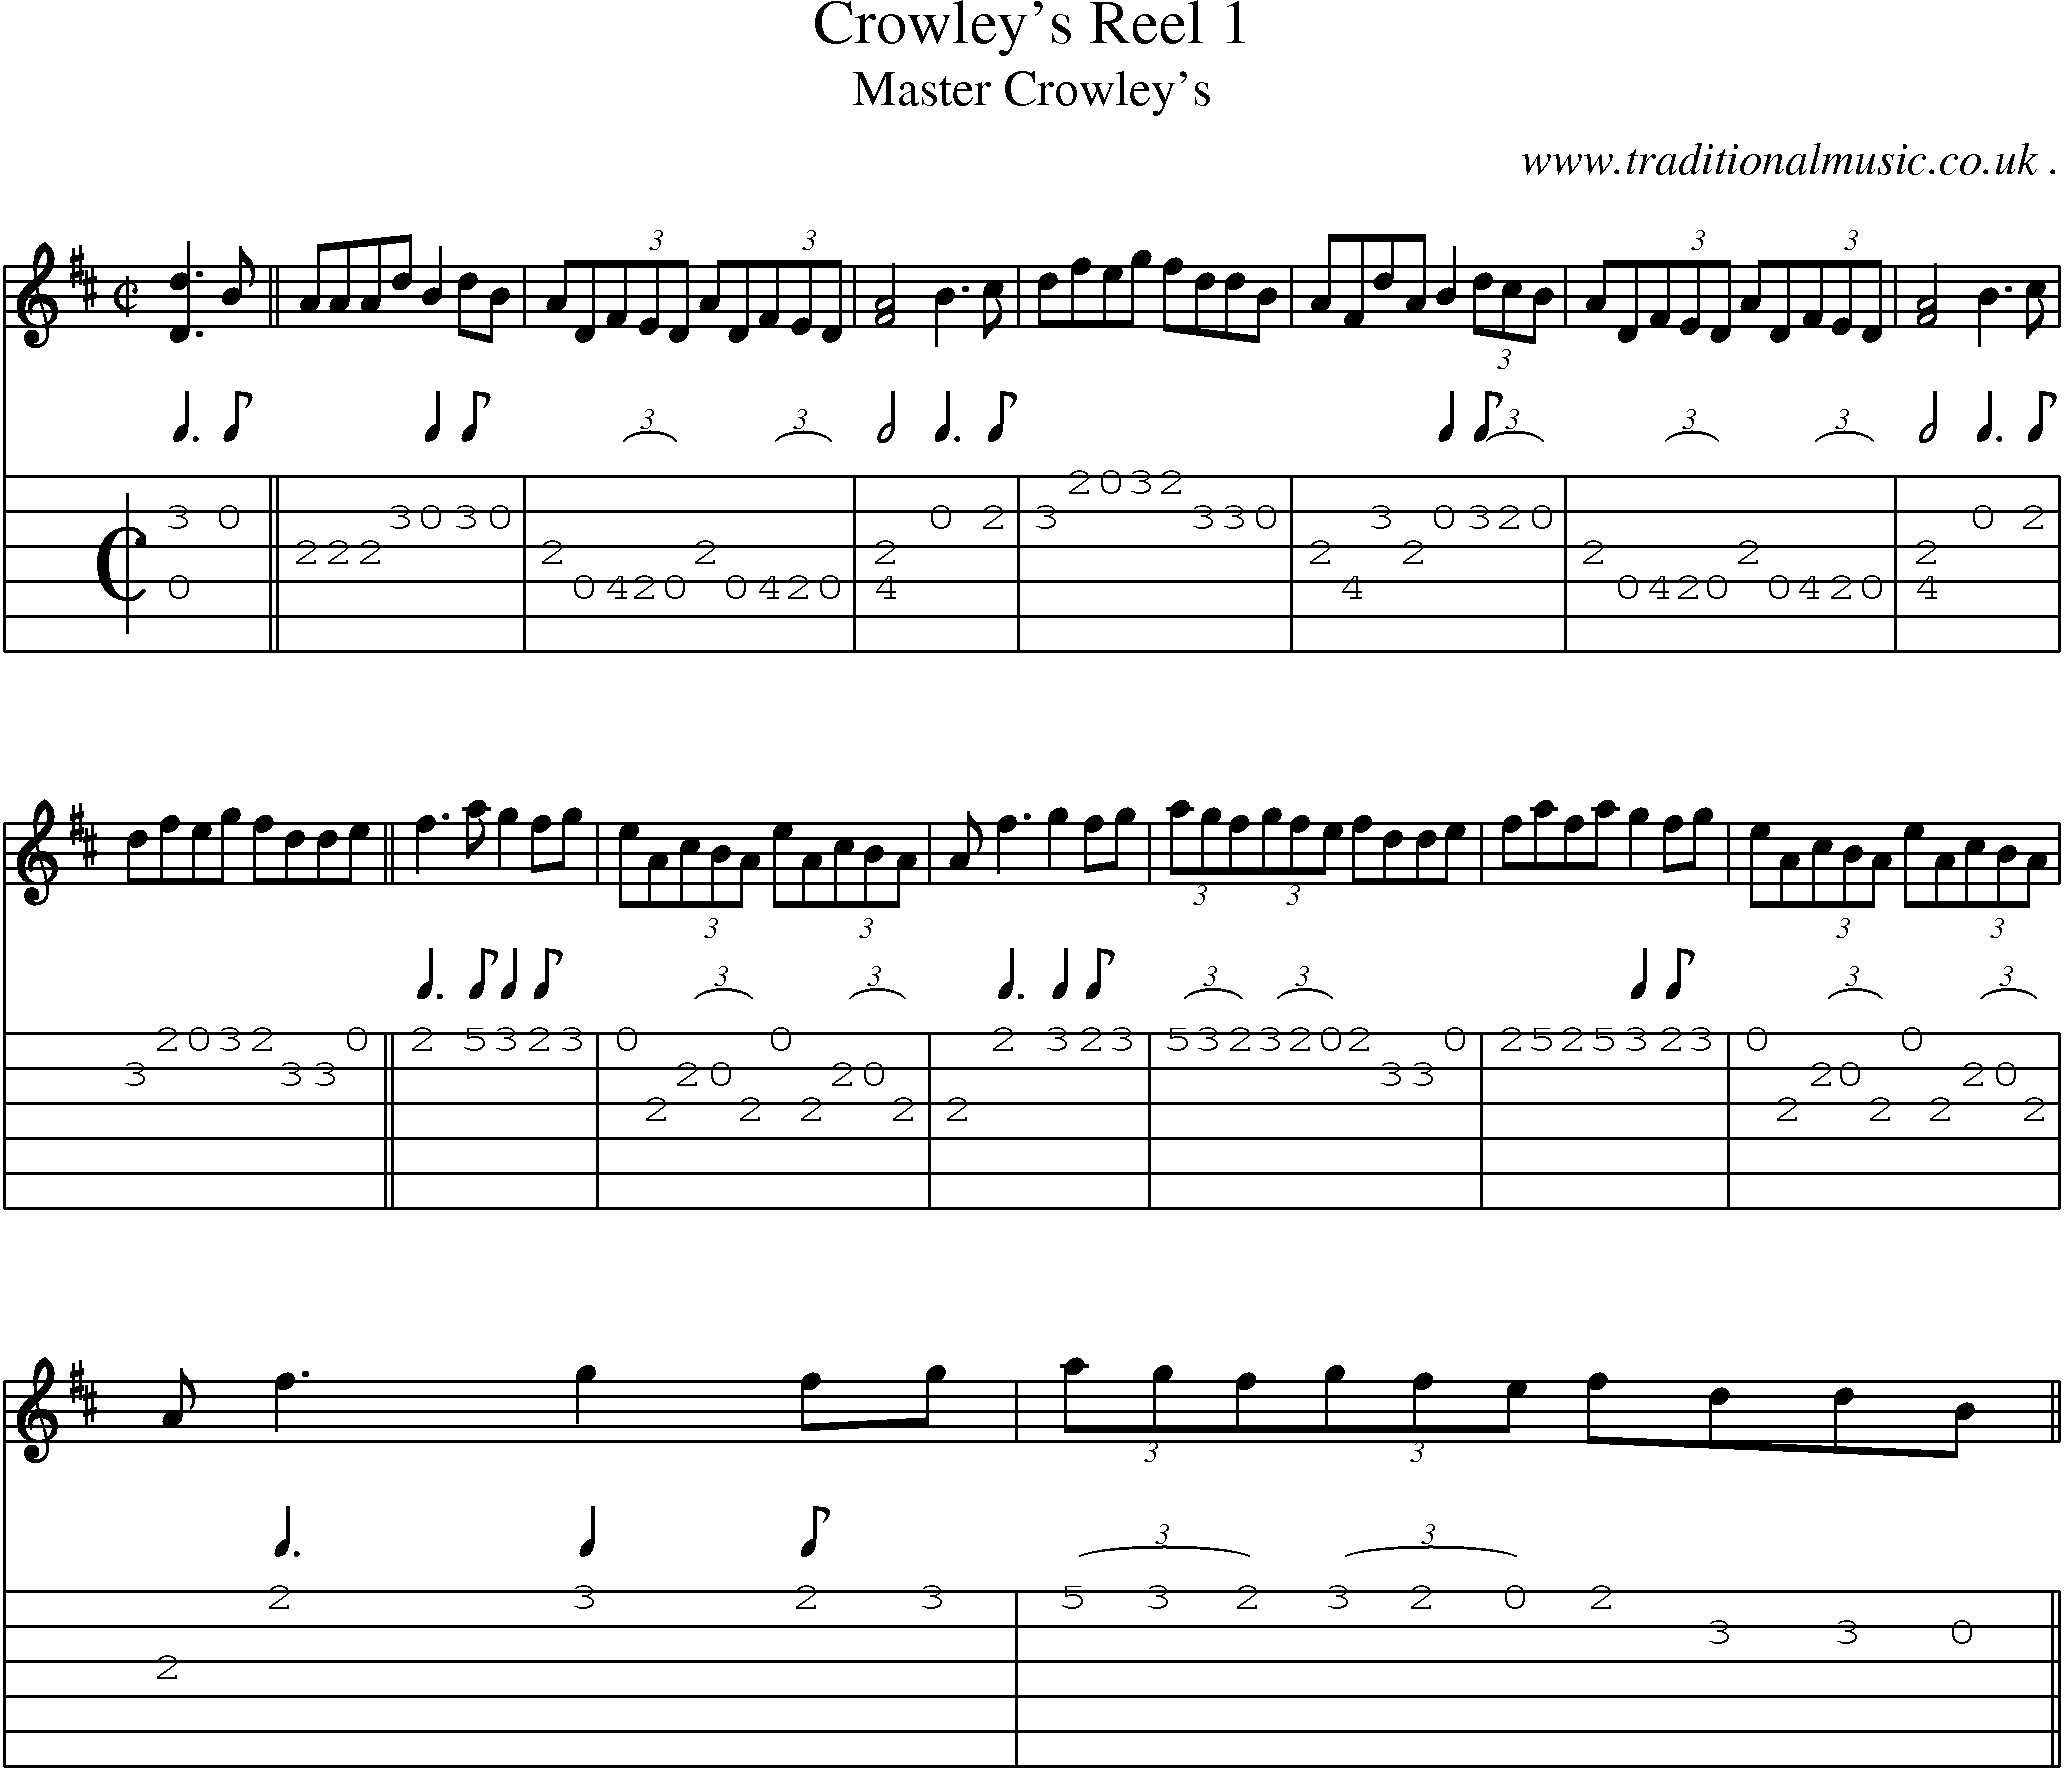 Sheet-Music and Guitar Tabs for Crowleys Reel 1